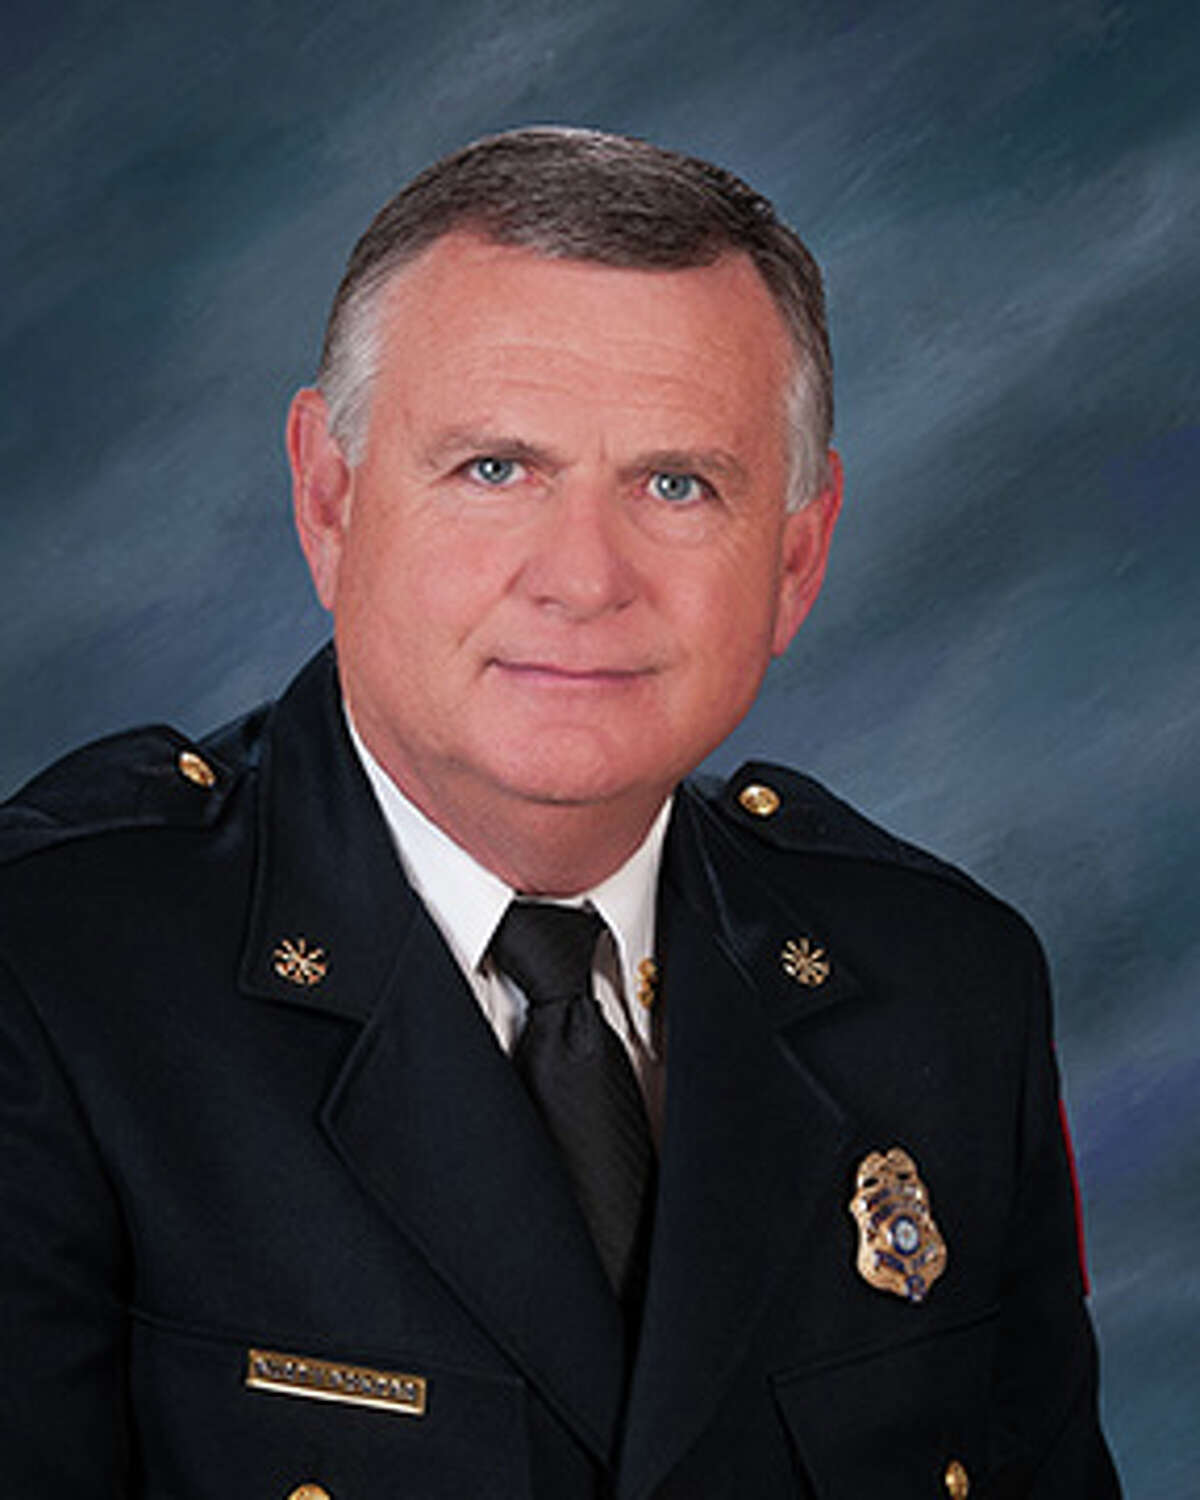 The City of Plainview announces the retirement of Fire Chief Rusty Powers, effective June 1